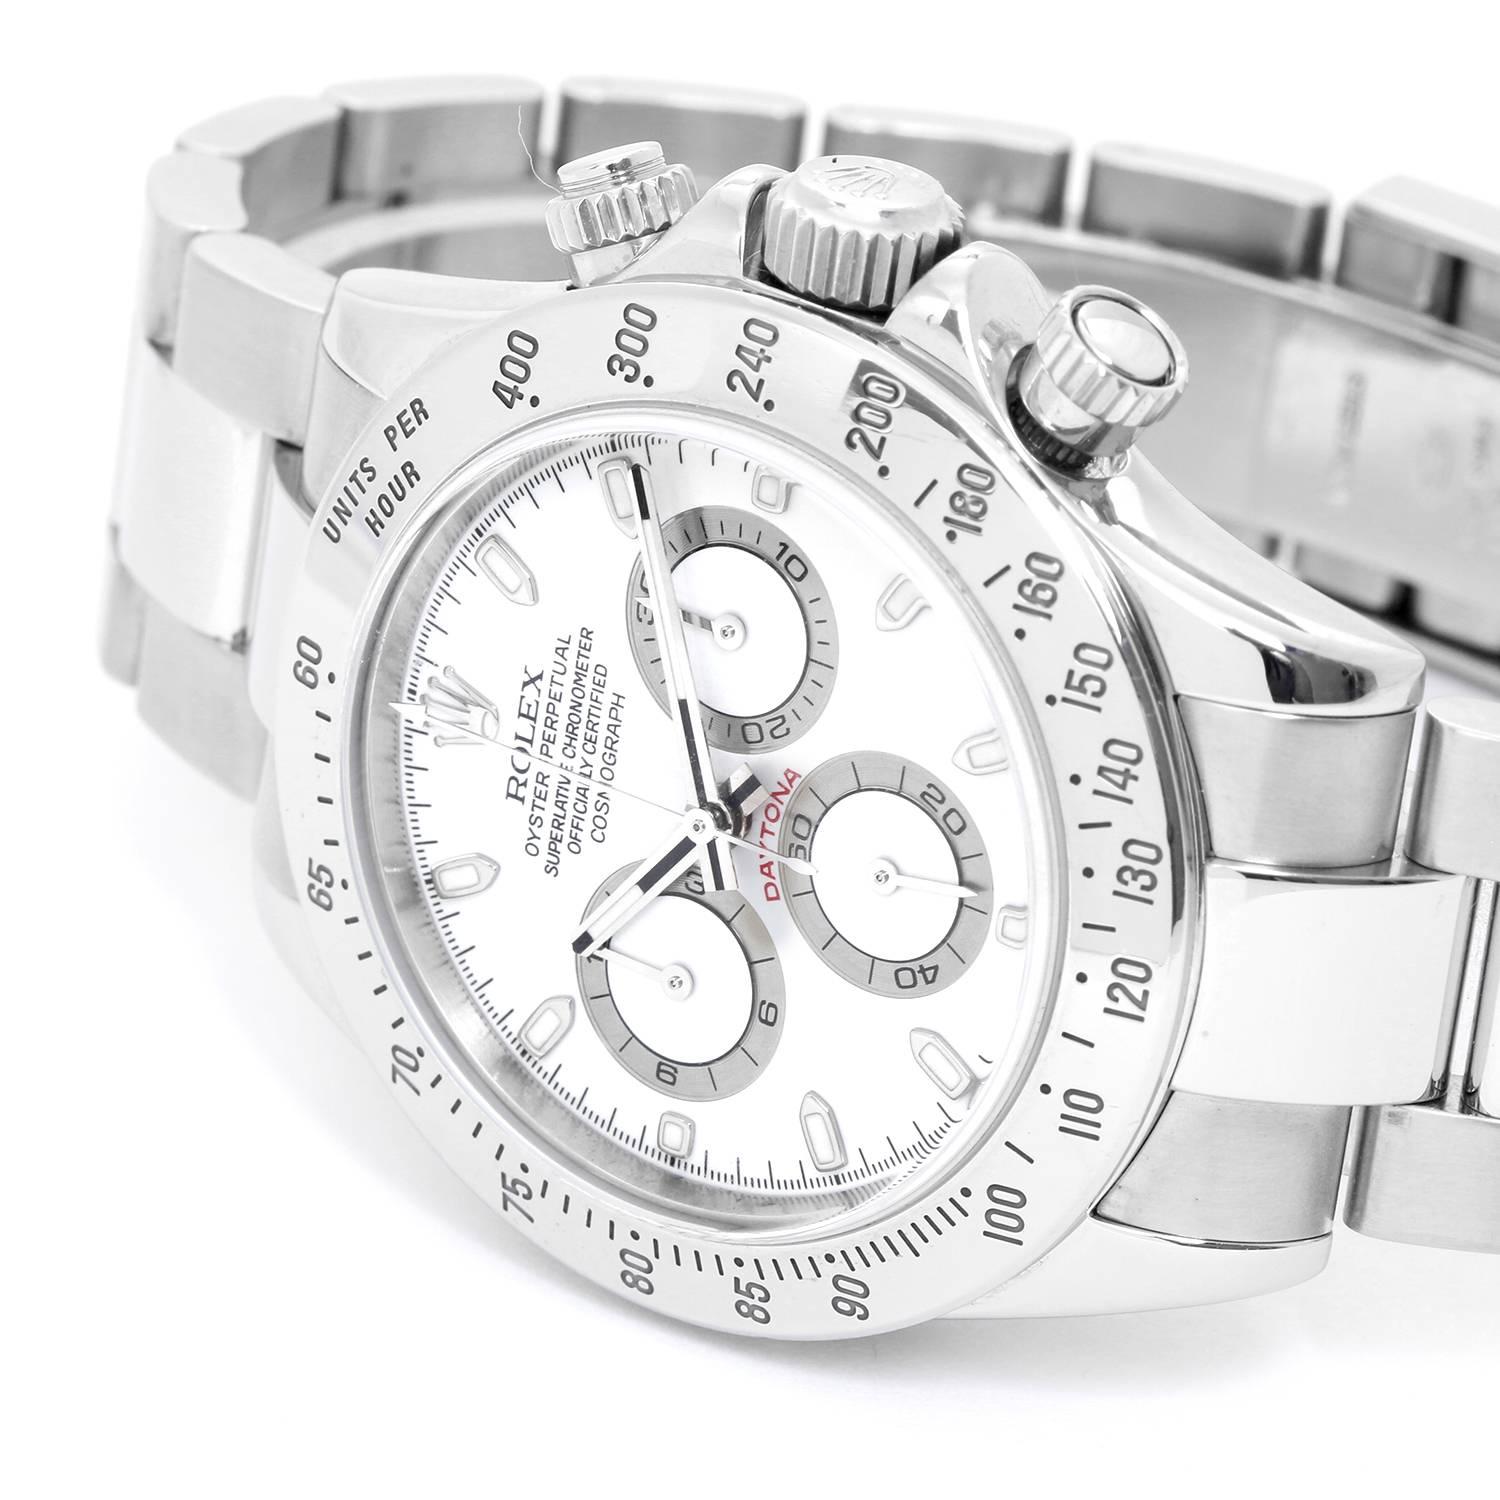 Men's Rolex Daytona Chronograph Stainless Steel Watch 116520 -  Automatic winding, chronograph, 44 jewels, sapphire crystal. Stainless steel case with steel bezel  (40mm diameter). White dial with luminous style hour markers. Stainless steel Oyster